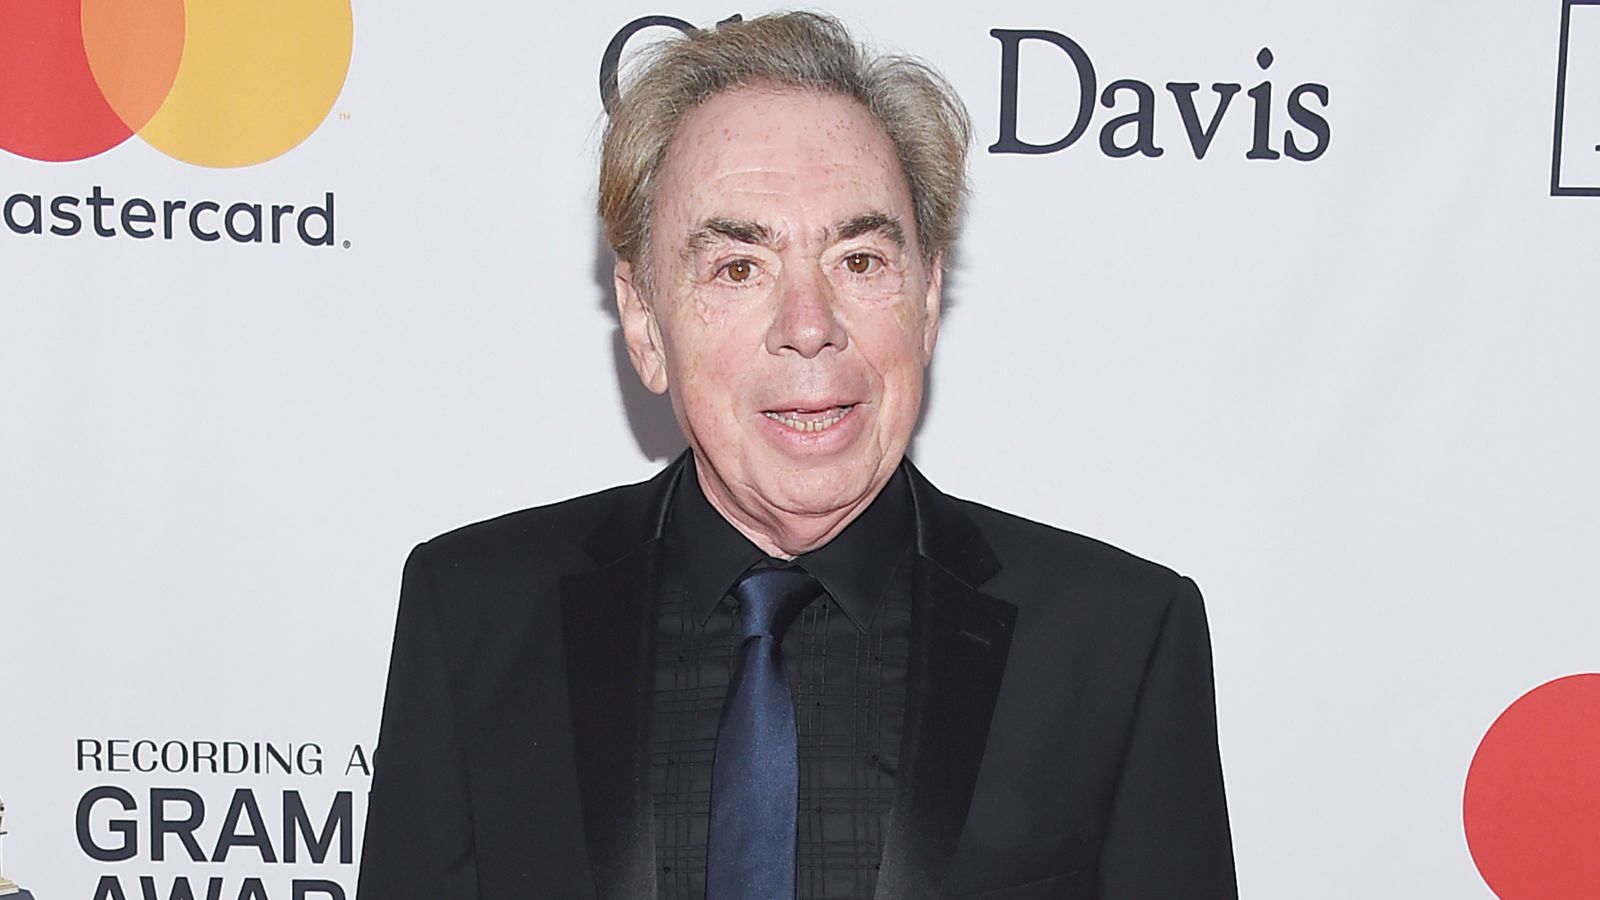 Andrew Lloyd Webber reveals son is 'critically ill' with gastric cancer - 'I am absolutely devastated'